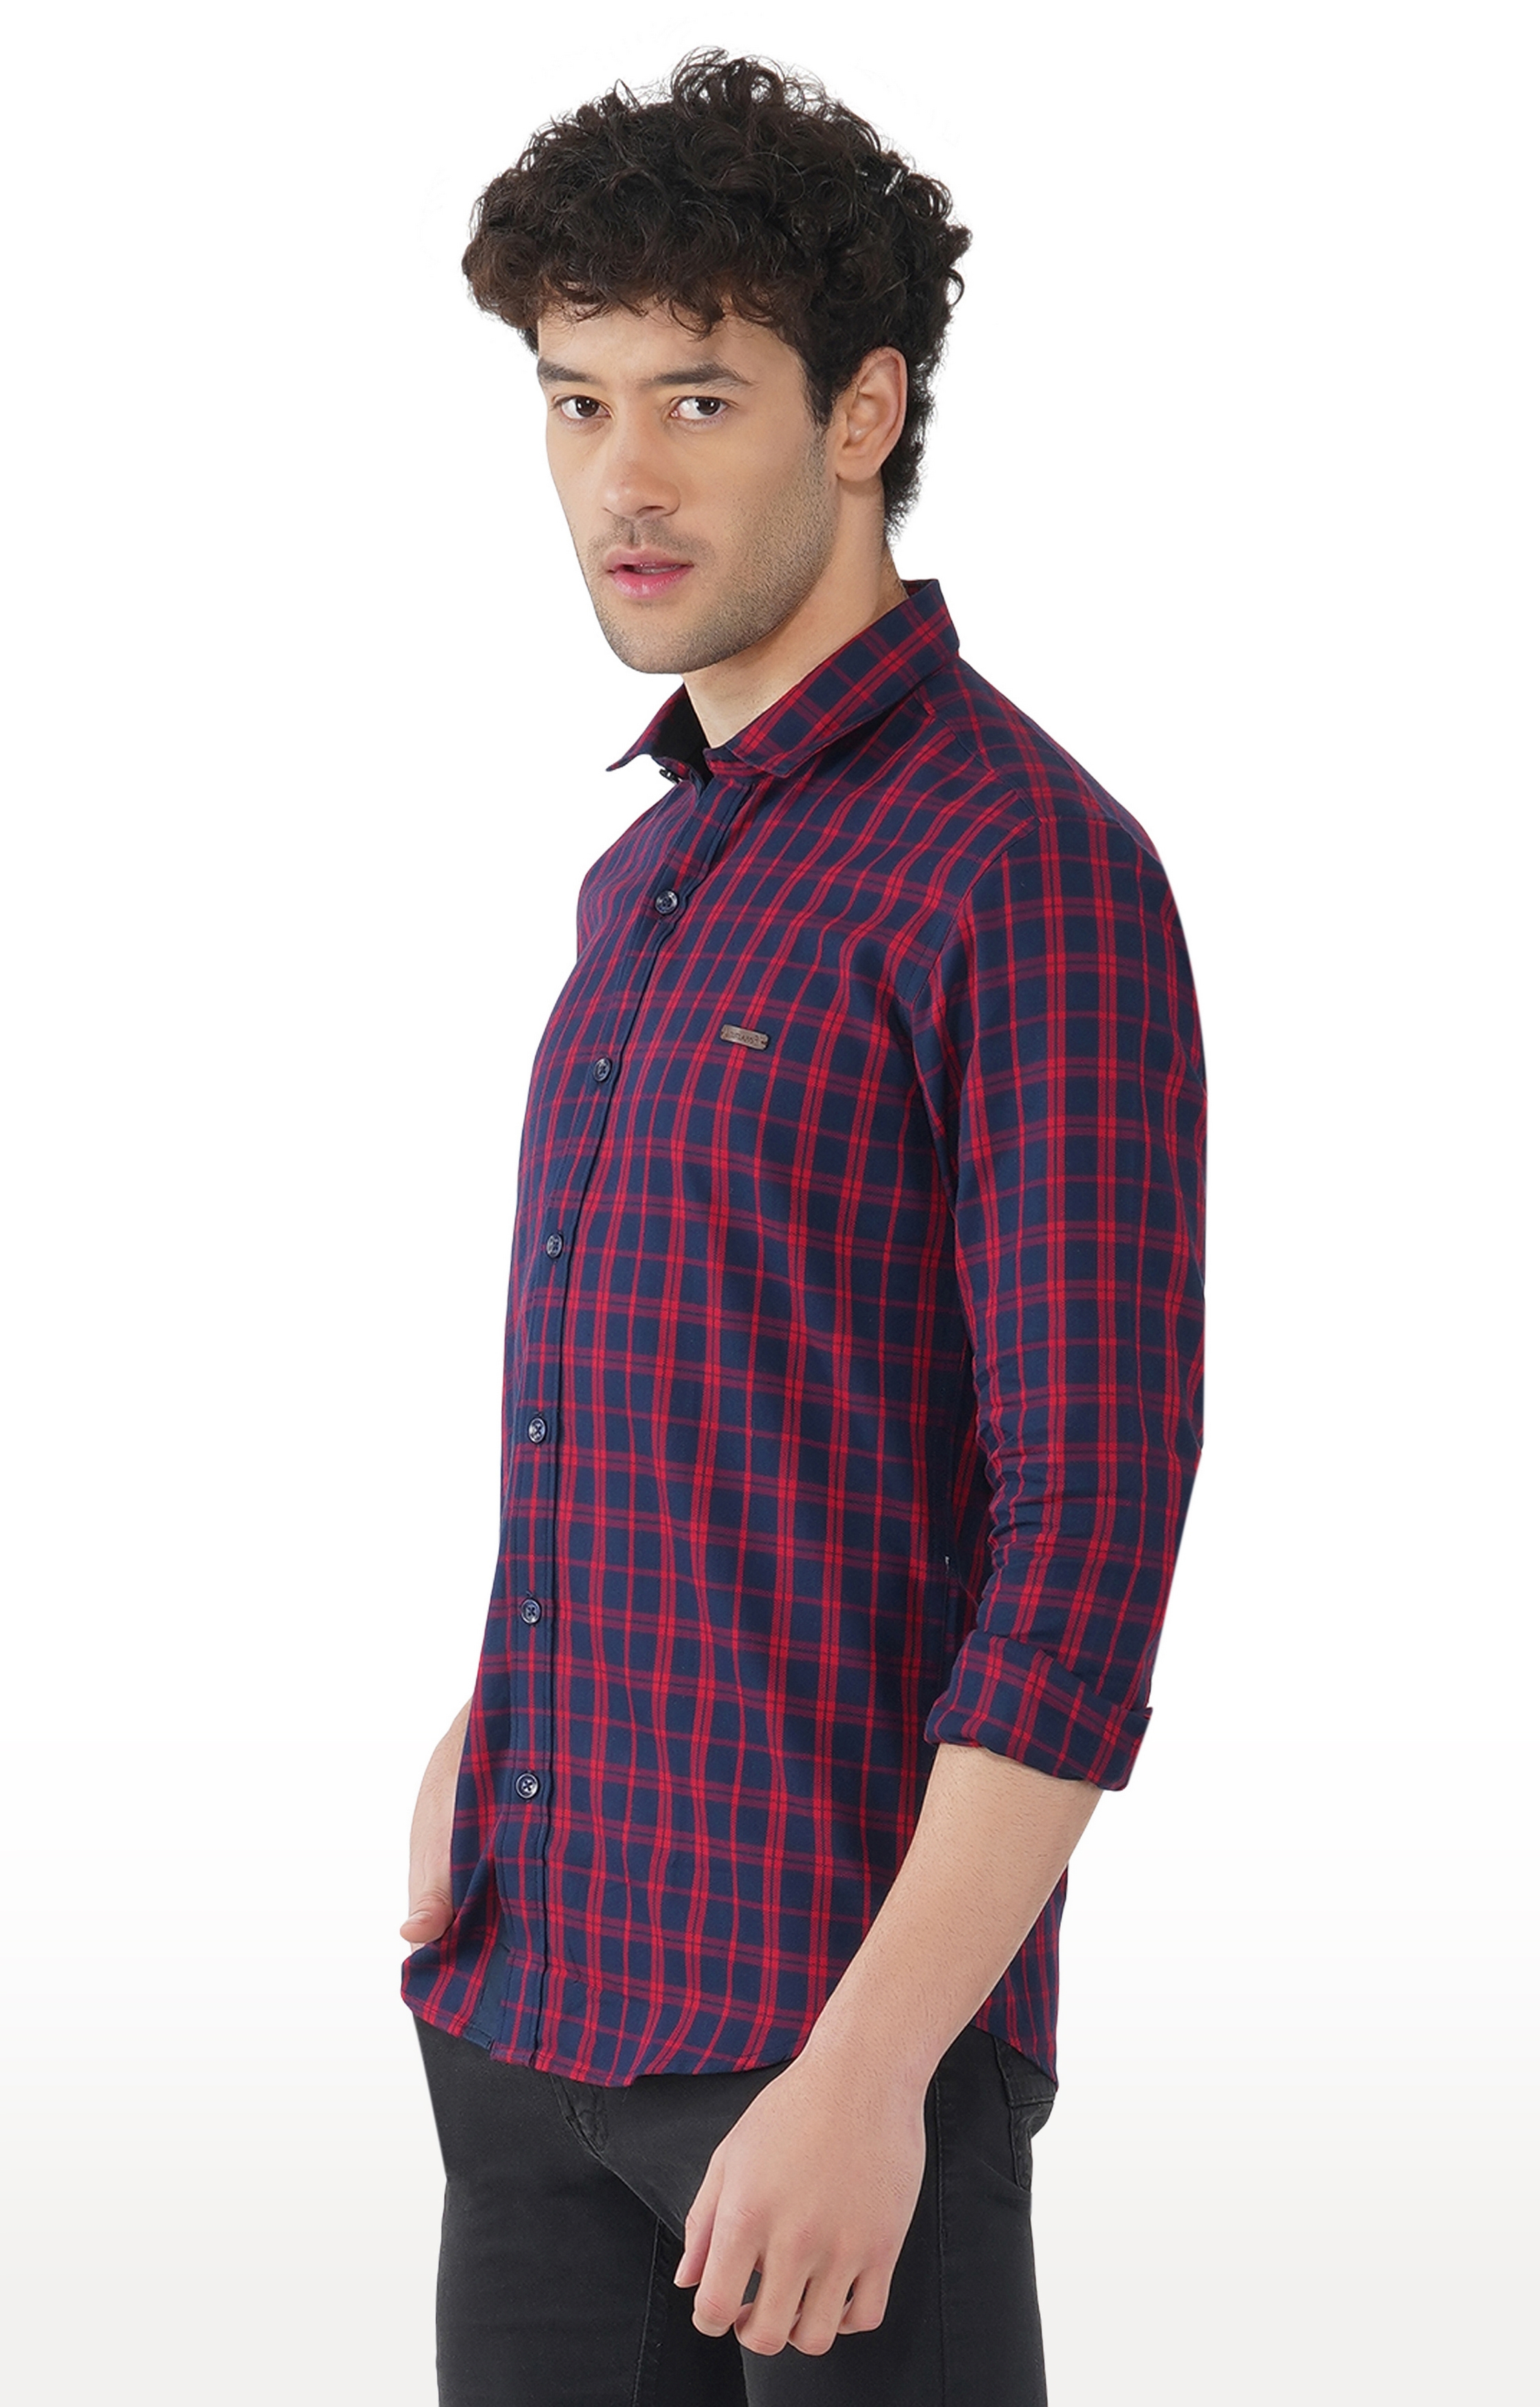 OUTLAWS | Outlaws 7041 - 100% Cotton Multi Color Check Smart Fit Shirt 3